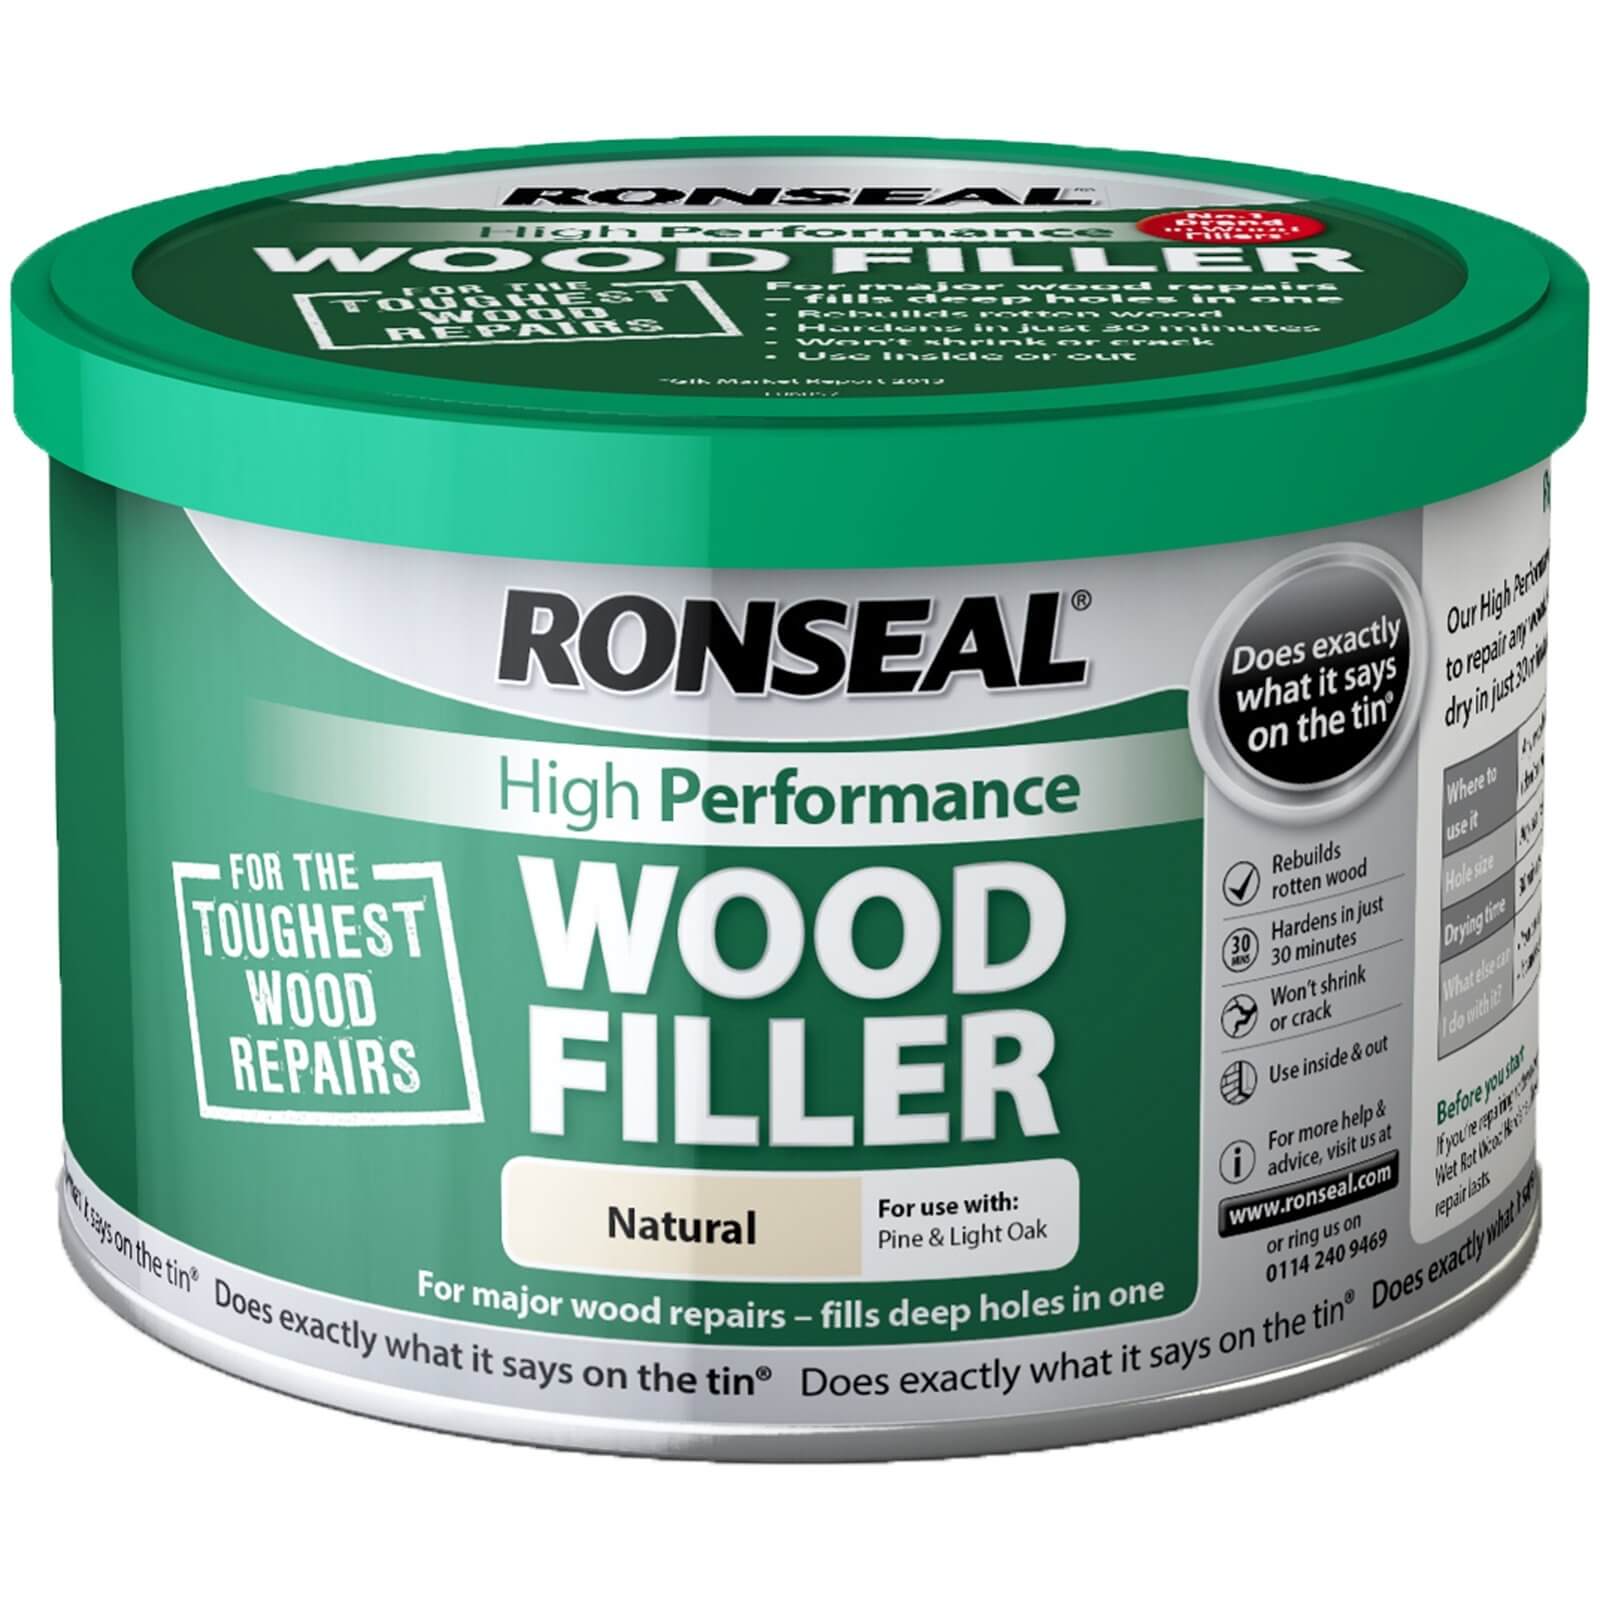 Photo of Ronseal High Performance Wood Filler - Natural - 250g